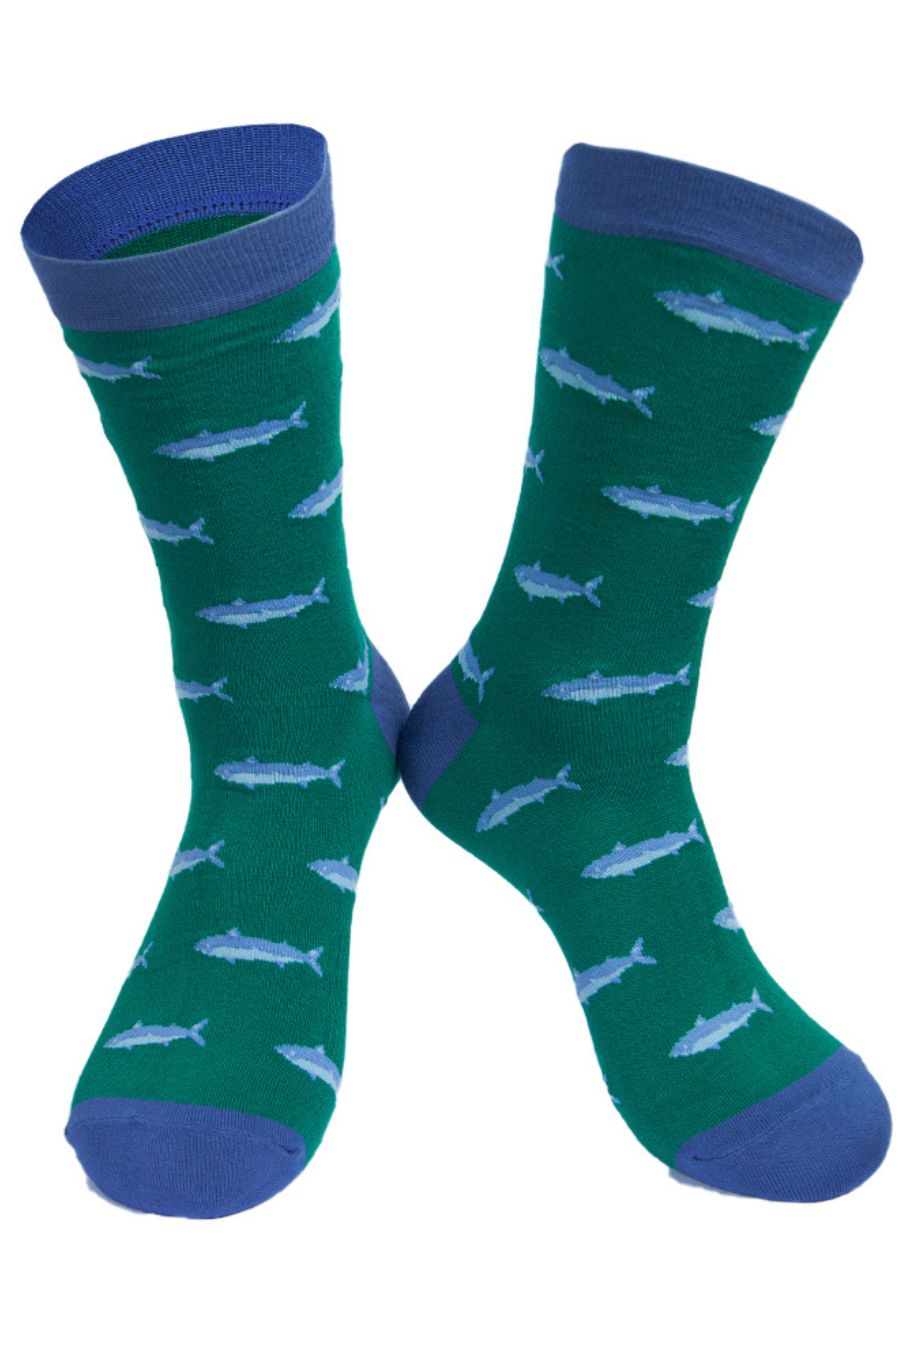 green and blue dress socks with a pattern of fish looking like they are swimming 